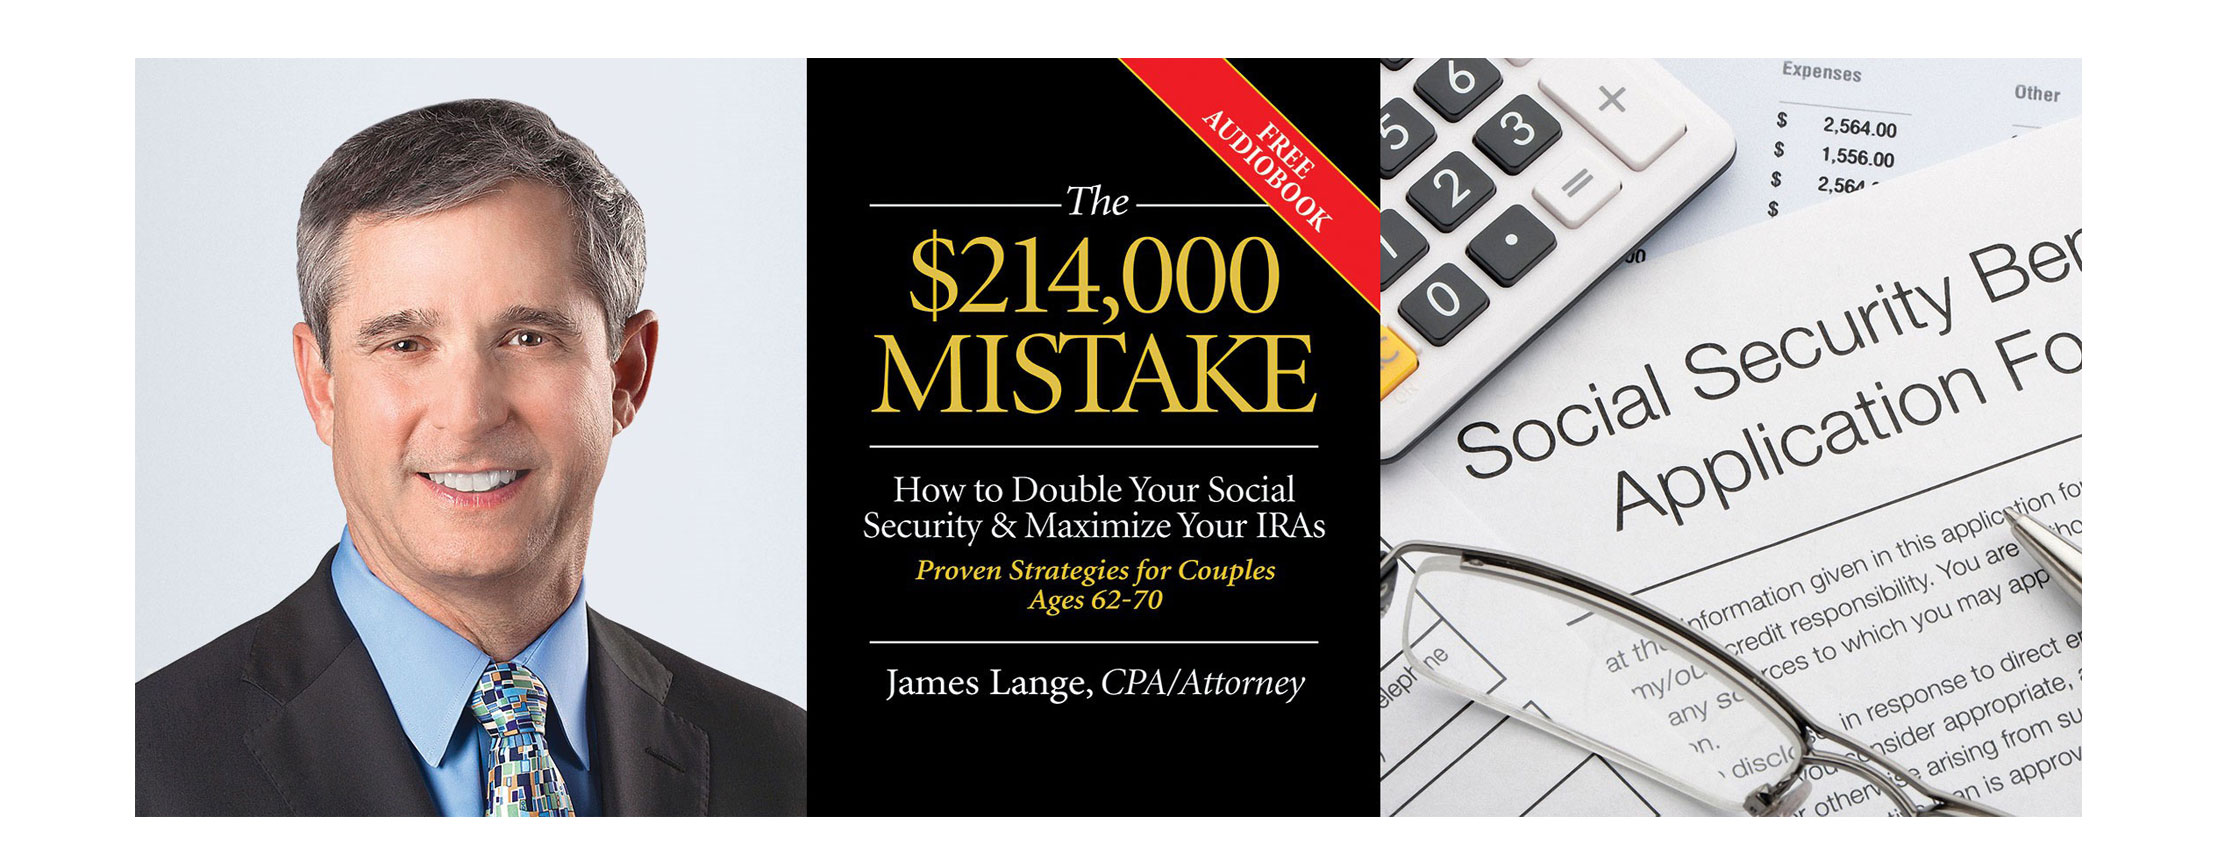 The $214,000 Mistake by James Lange available on PayTaxesLater.com